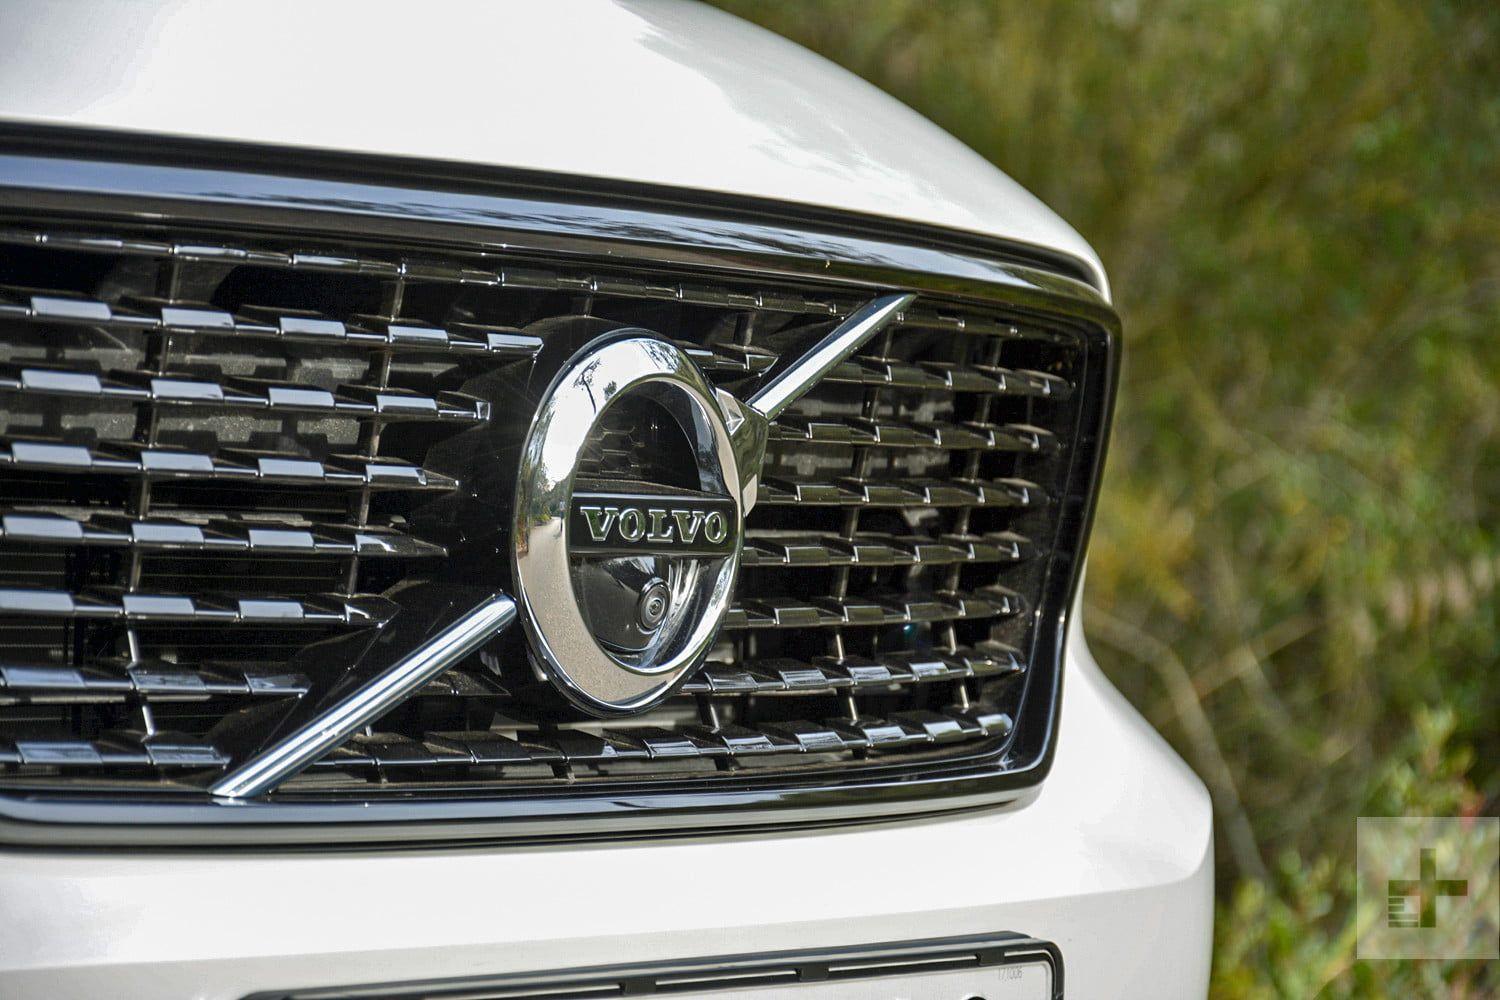 2019 Volvo Logo - Volvo Launches New Brand to Expand Global Mobility Operations ...